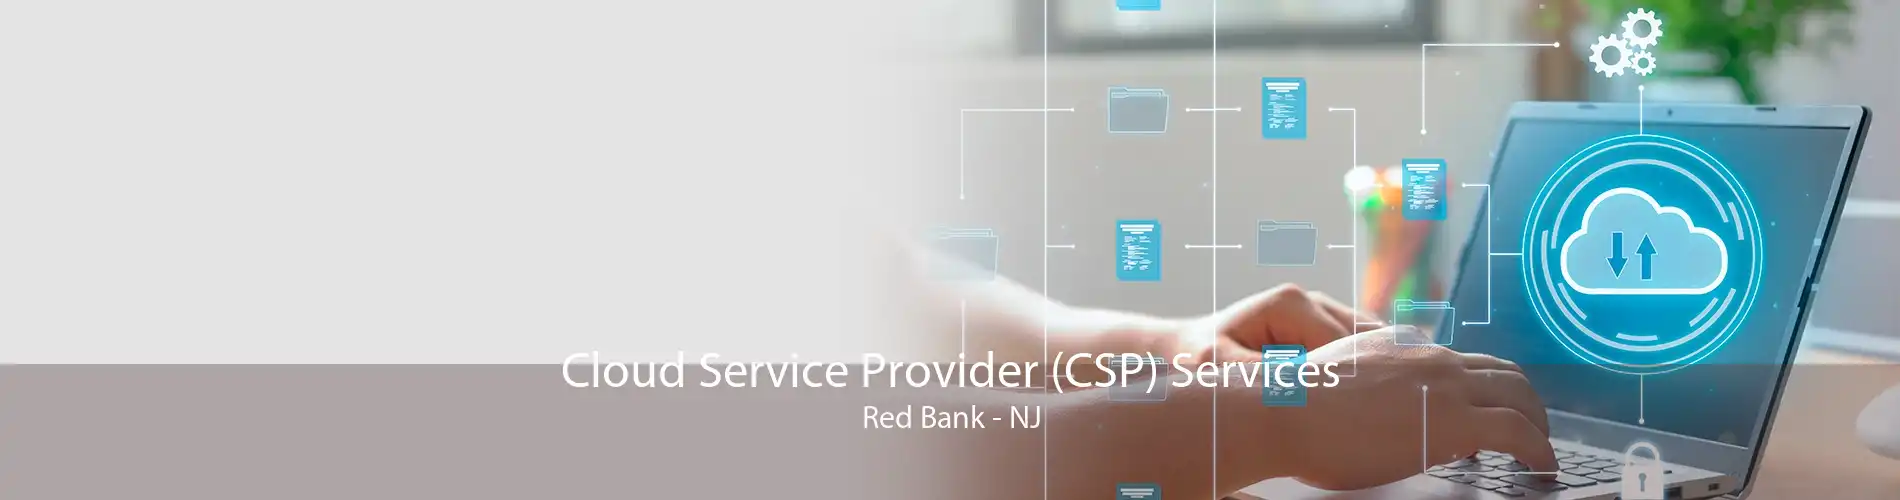 Cloud Service Provider (CSP) Services Red Bank - NJ